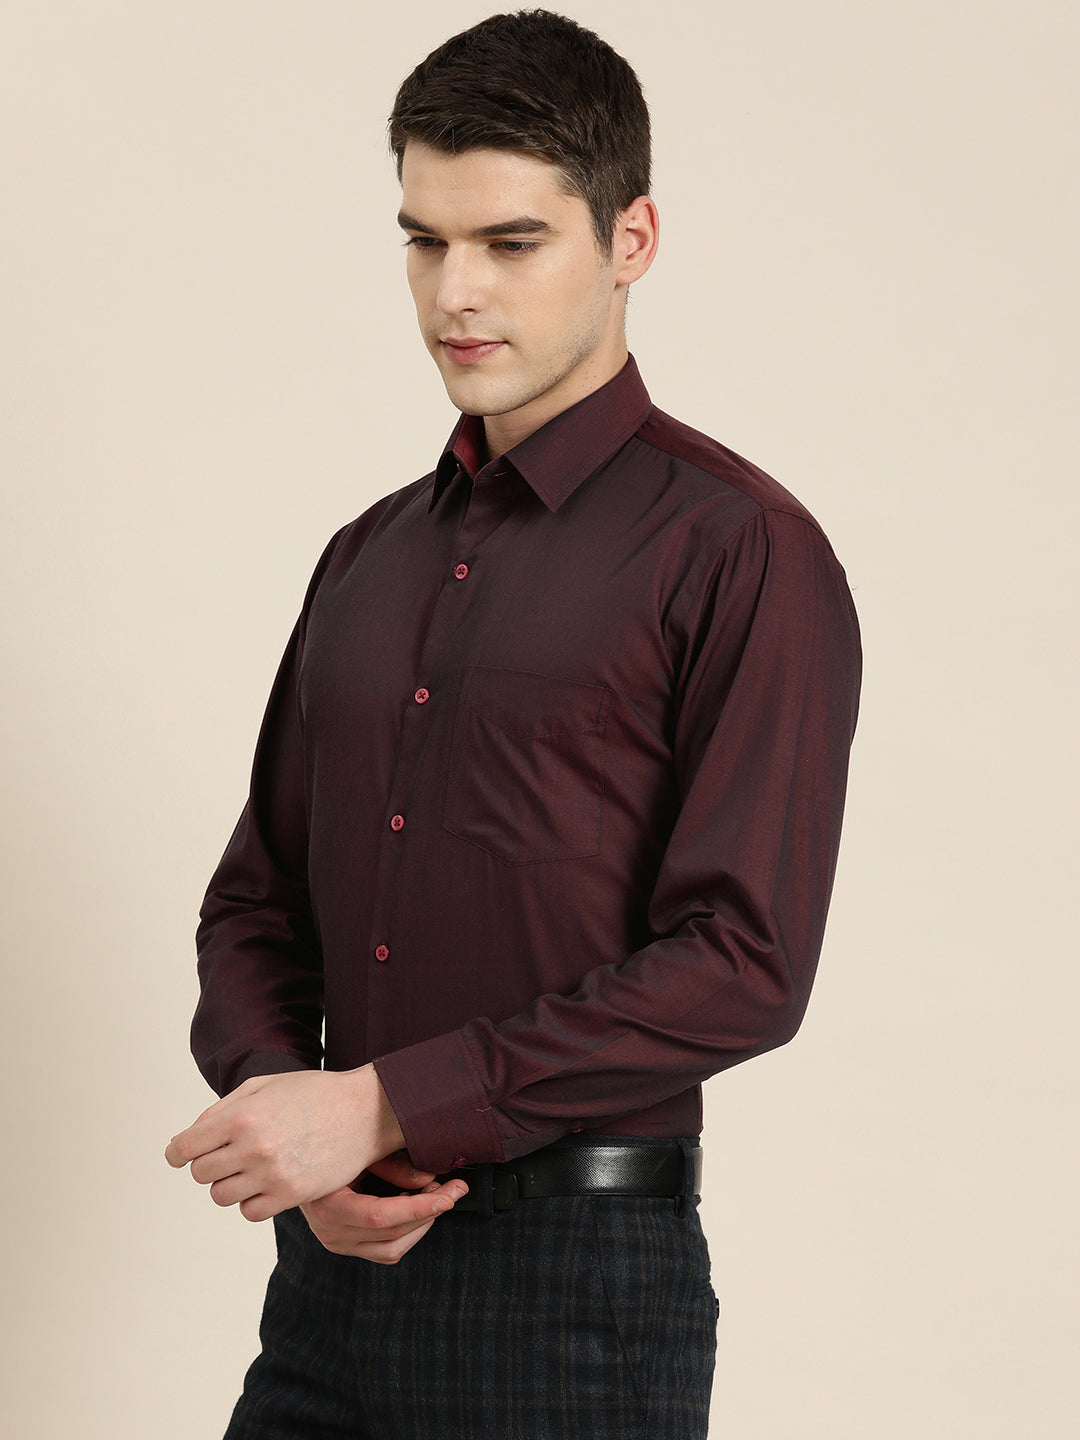 Mithila Clothes House Men Solid Casual Maroon Shirt - Buy Mithila Clothes  House Men Solid Casual Maroon Shirt Online at Best Prices in India |  Flipkart.com